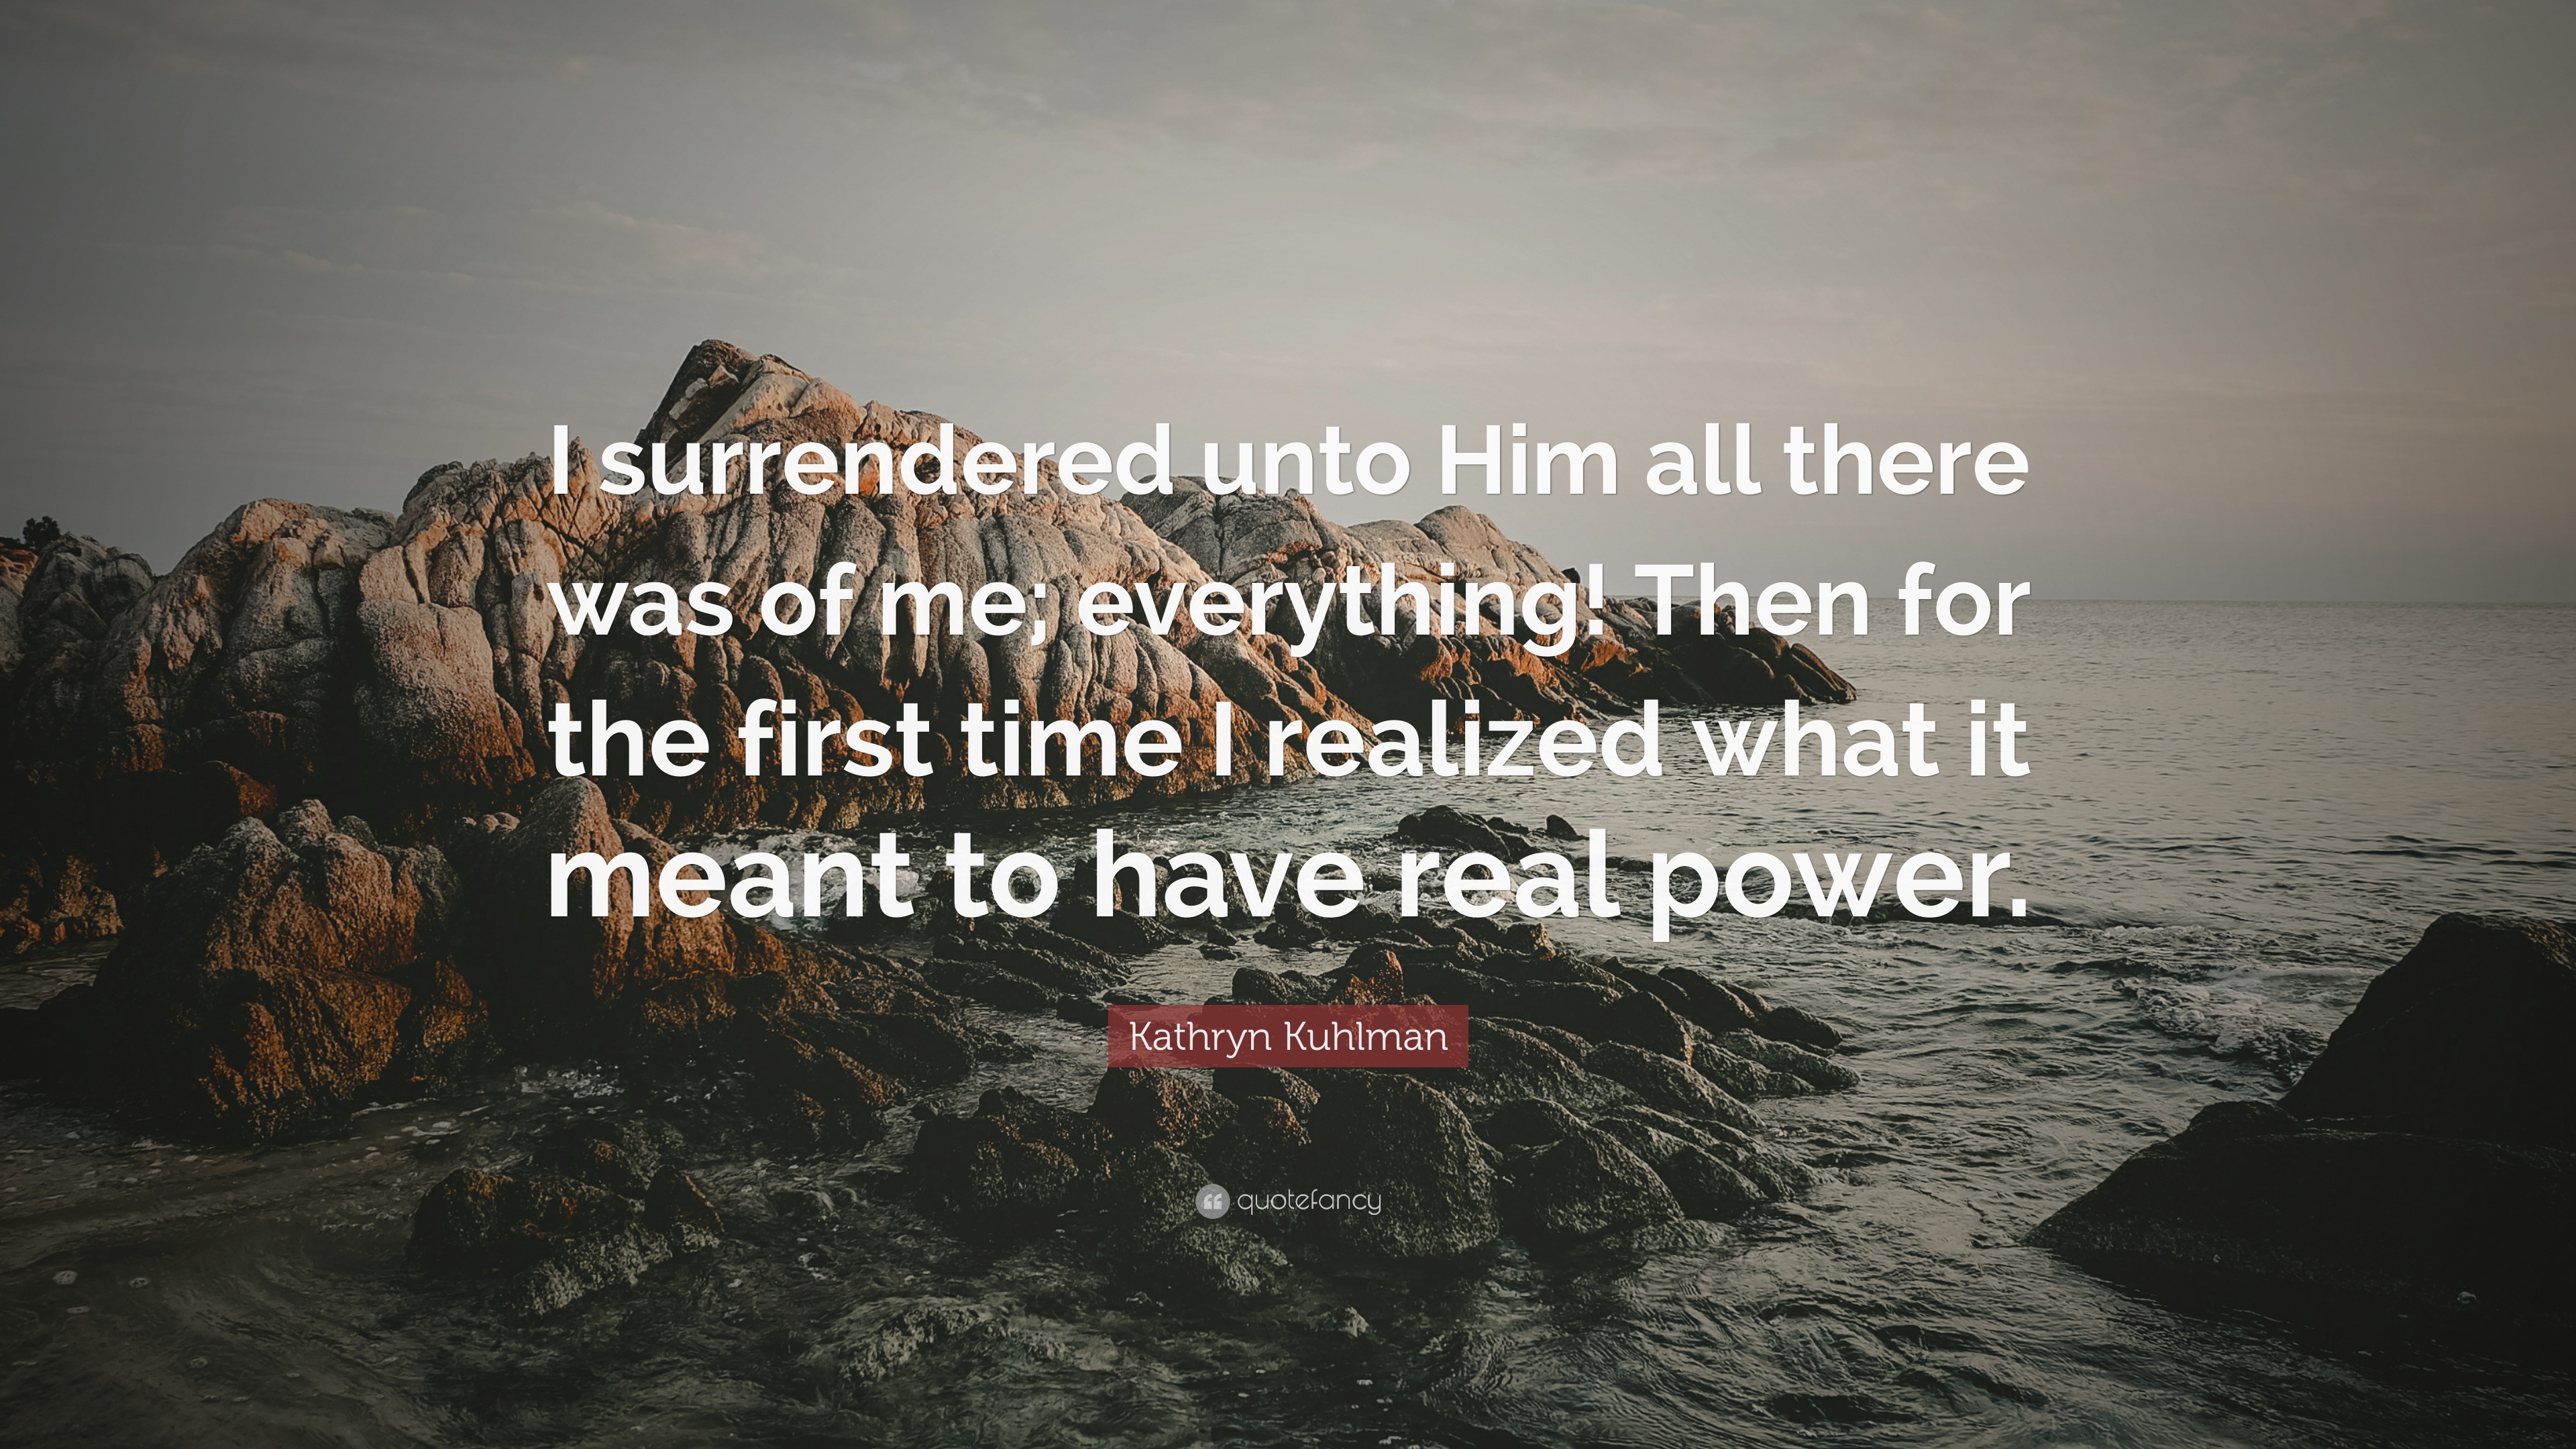 Kathryn Kuhlman Quote “I surrendered unto Him all there was of me